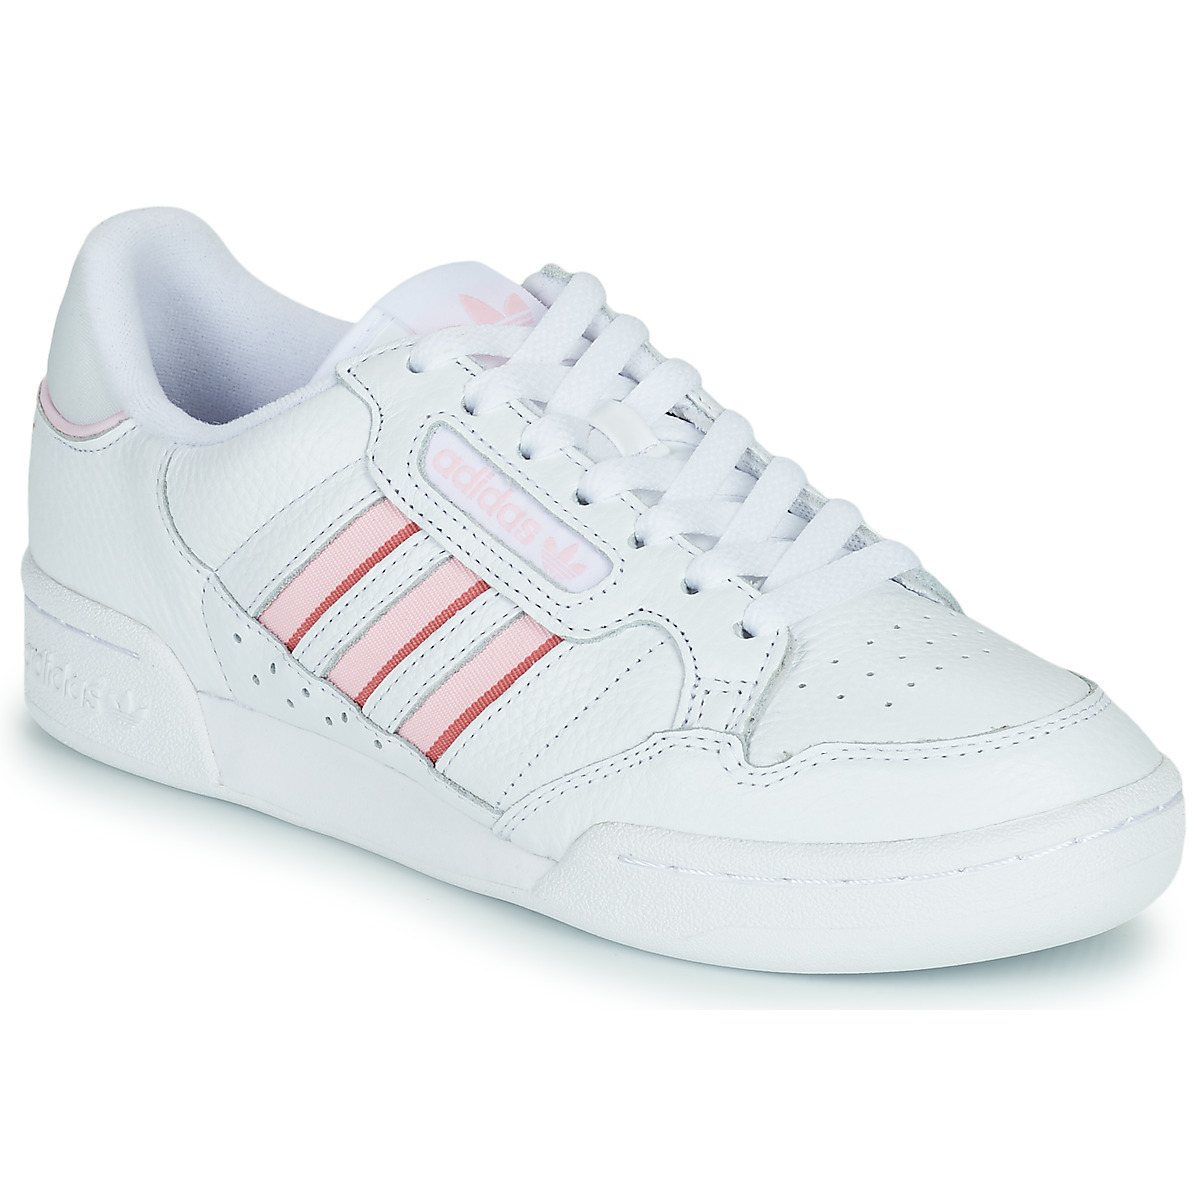 Adidas - Ladies Sneakers in White from Spartoo GOOFASH